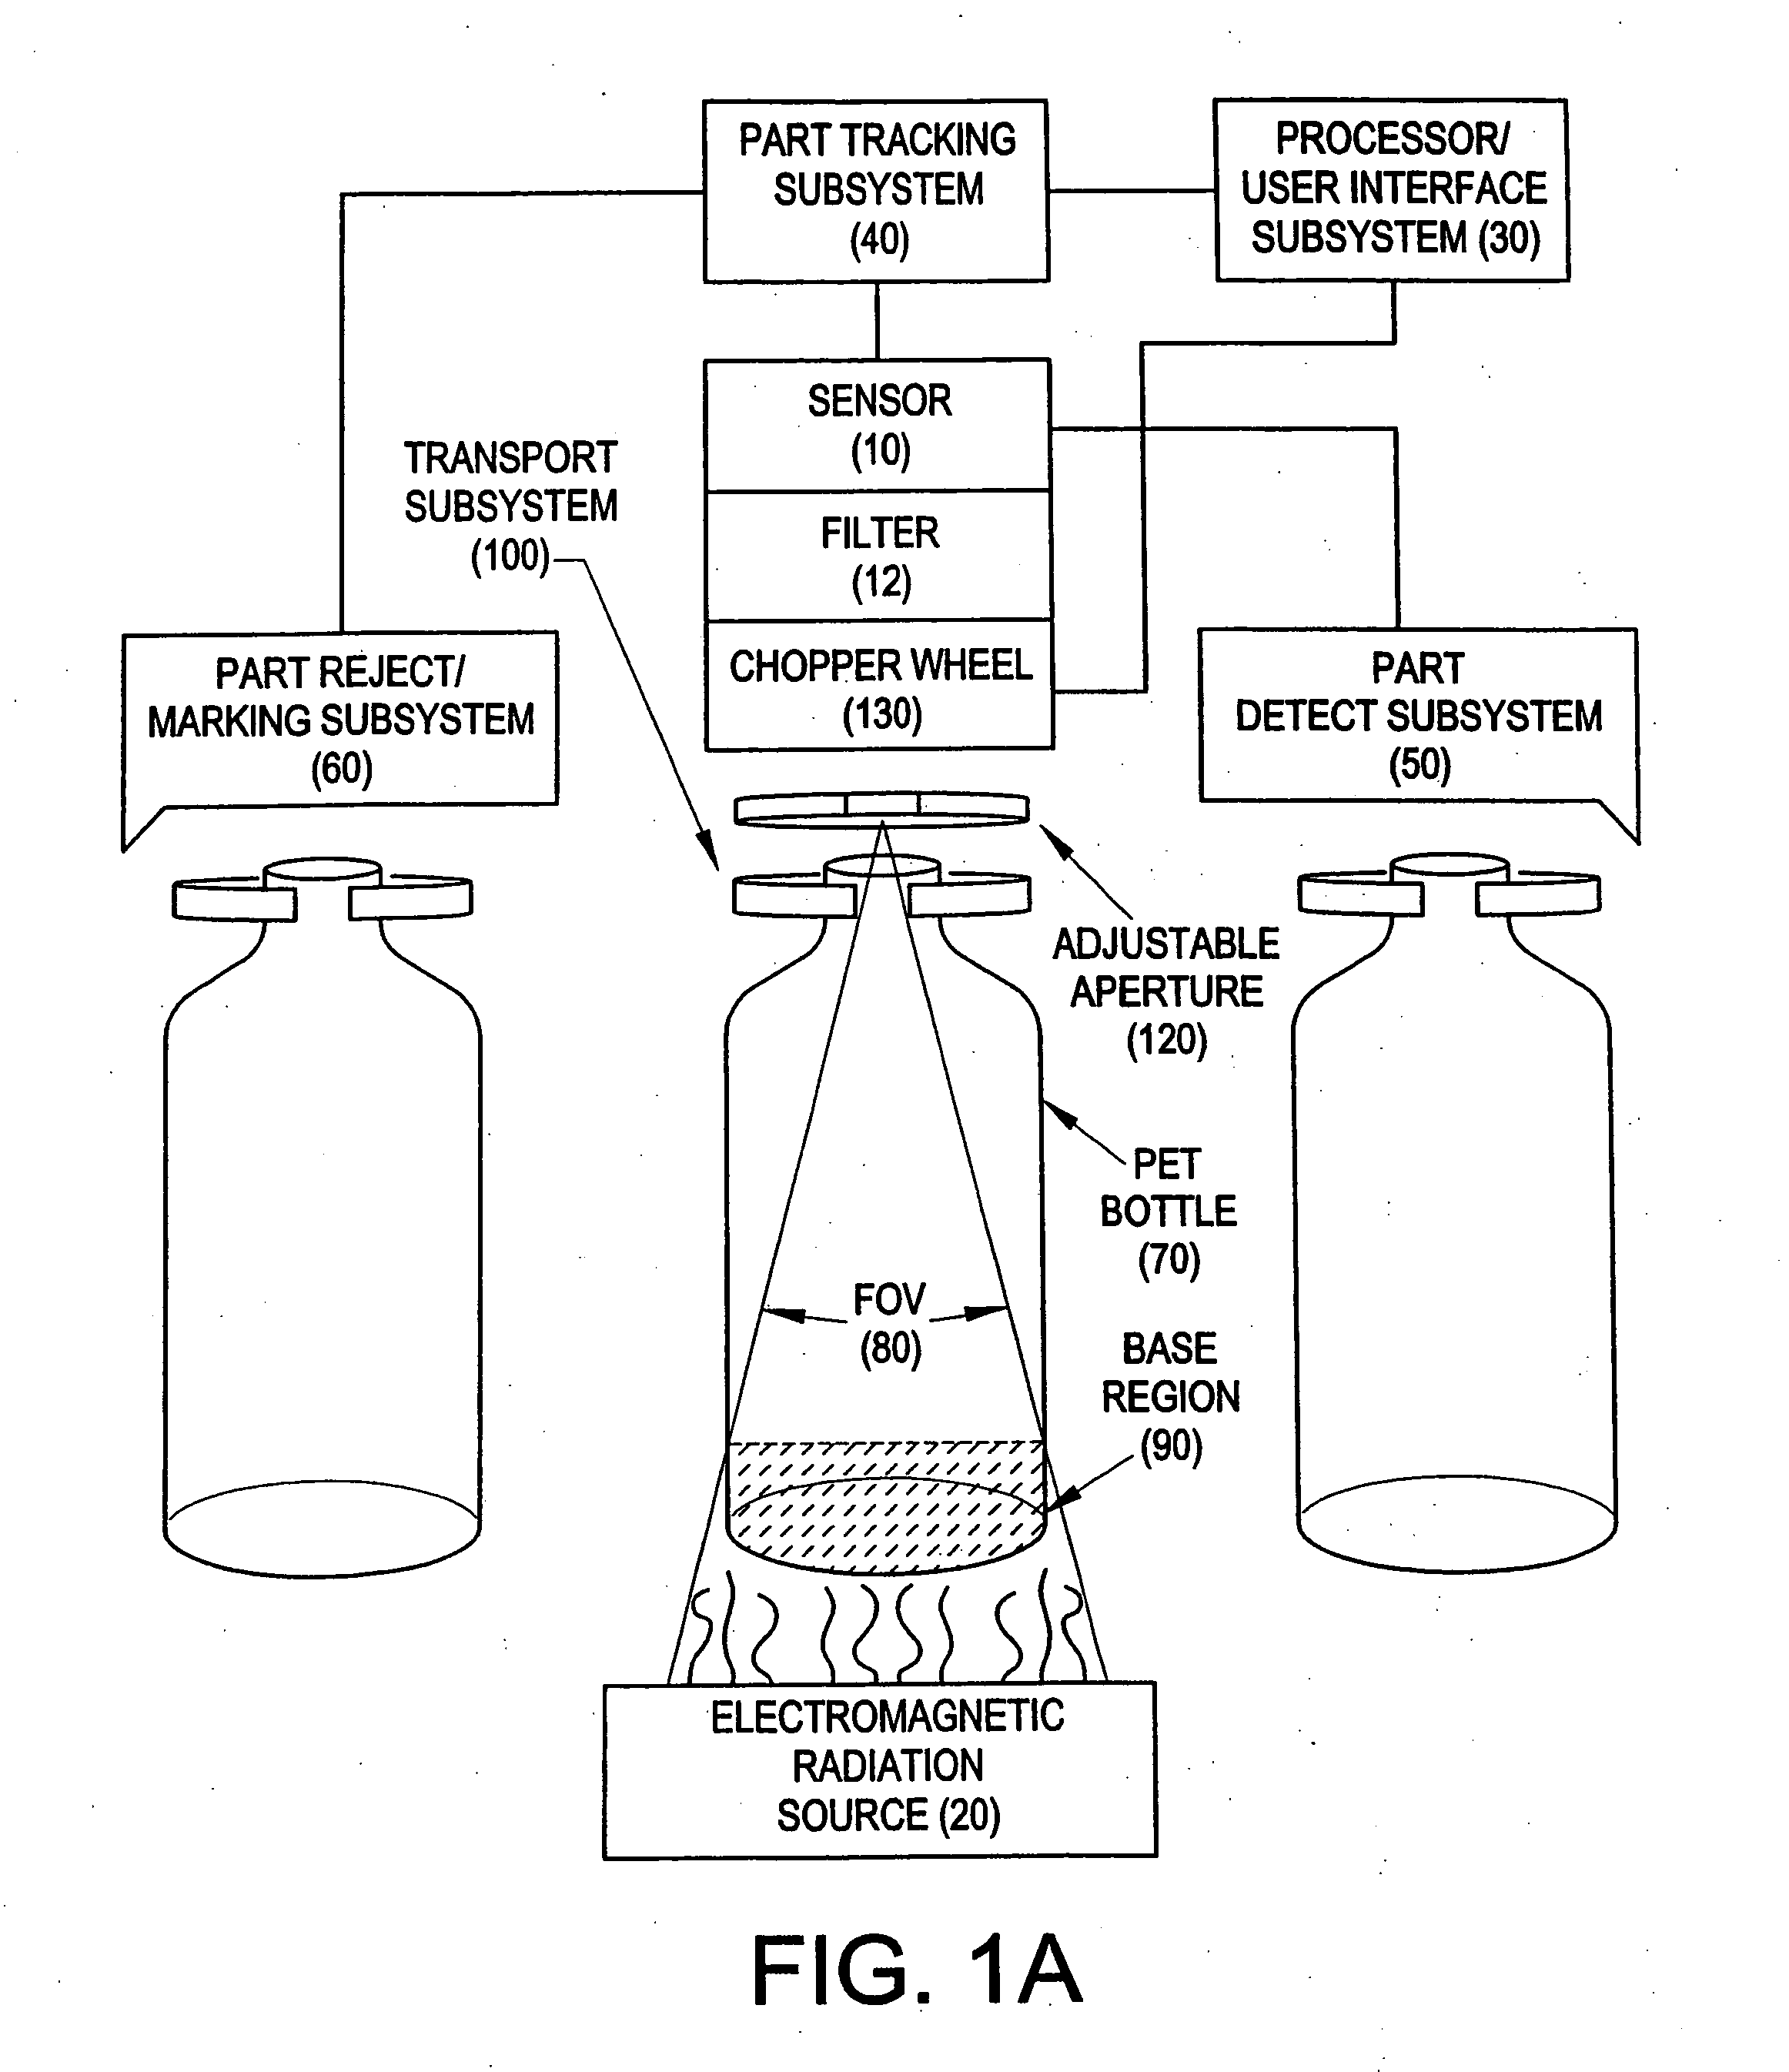 Apparatus and method for providing spatially-selective on-line mass or volume measurements of manufactured articles